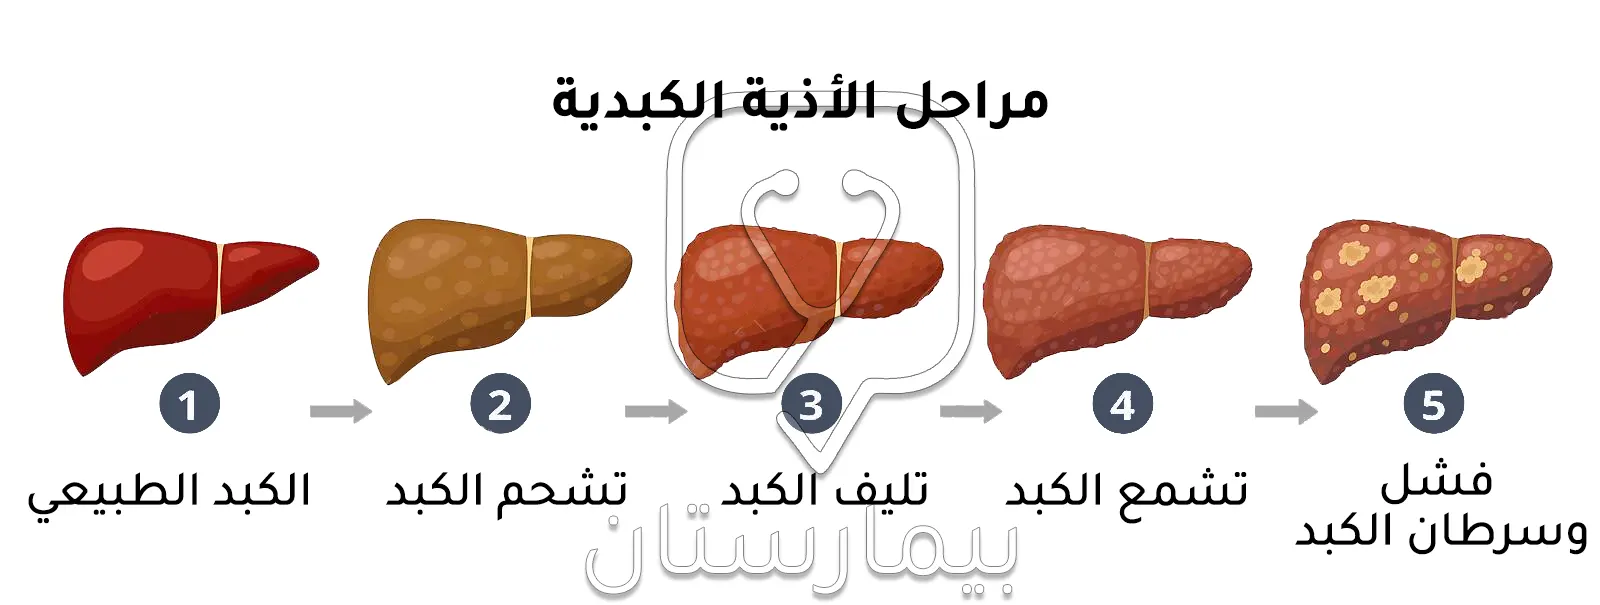 An image showing the stages of liver damage that ends in cirrhosis and thus transferring the patient to liver transplantation